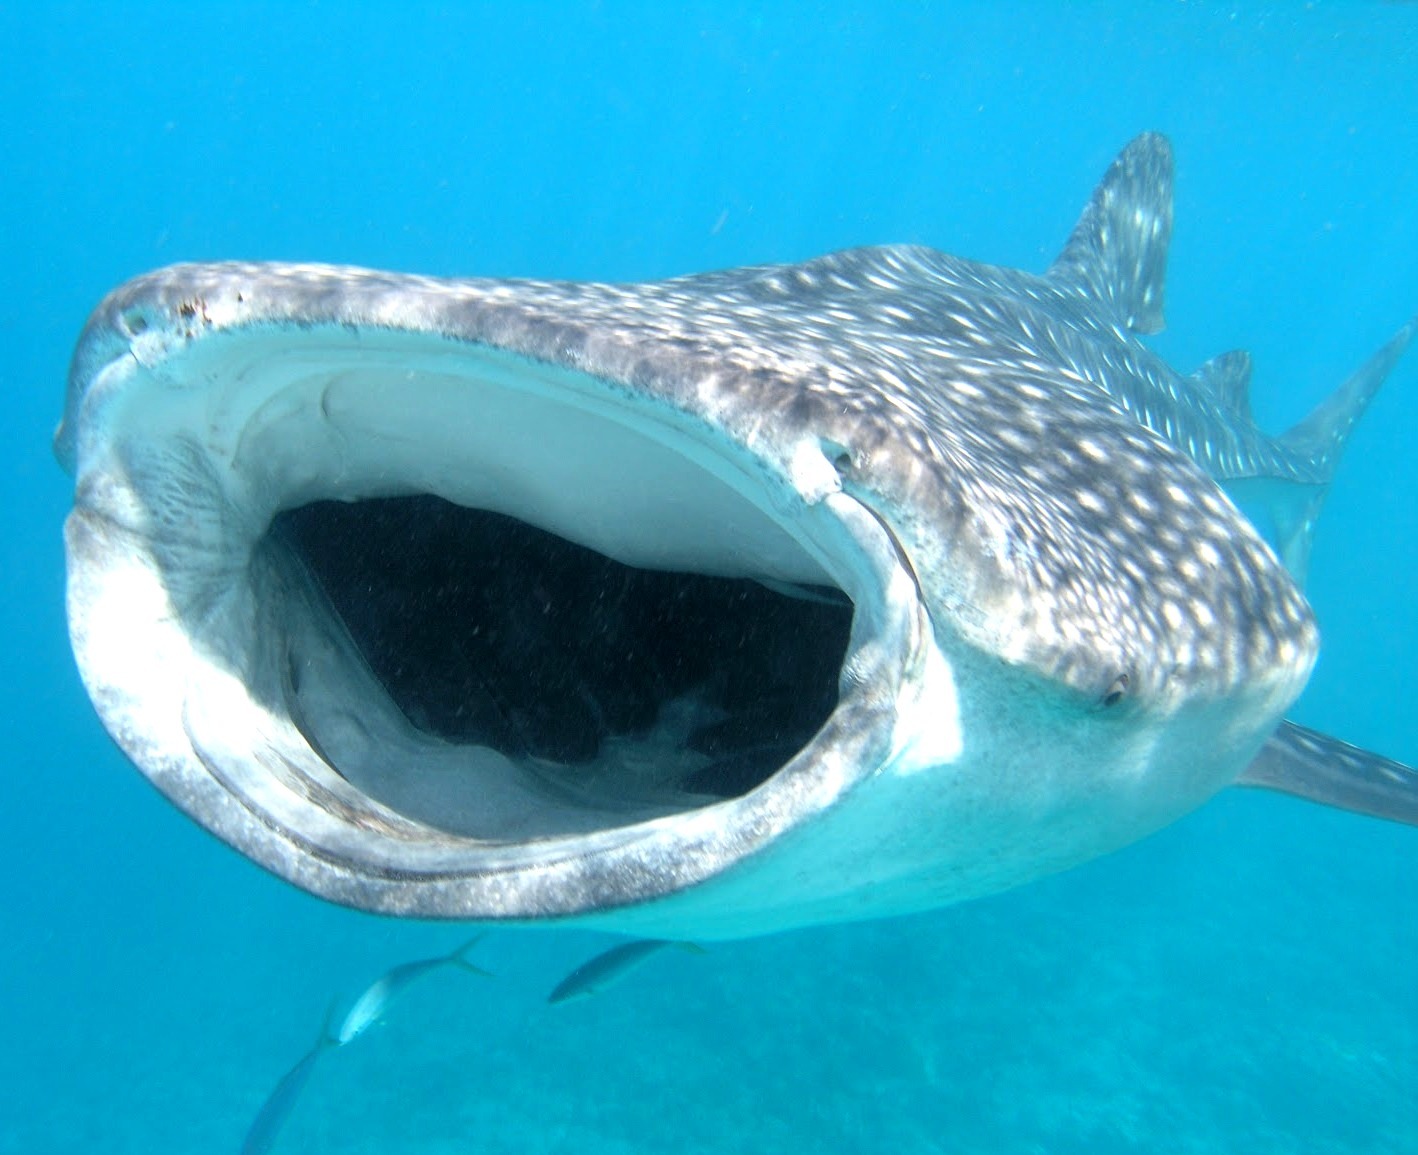 Example of a Whale Sharks toothless mouth in Cancun, Mexico